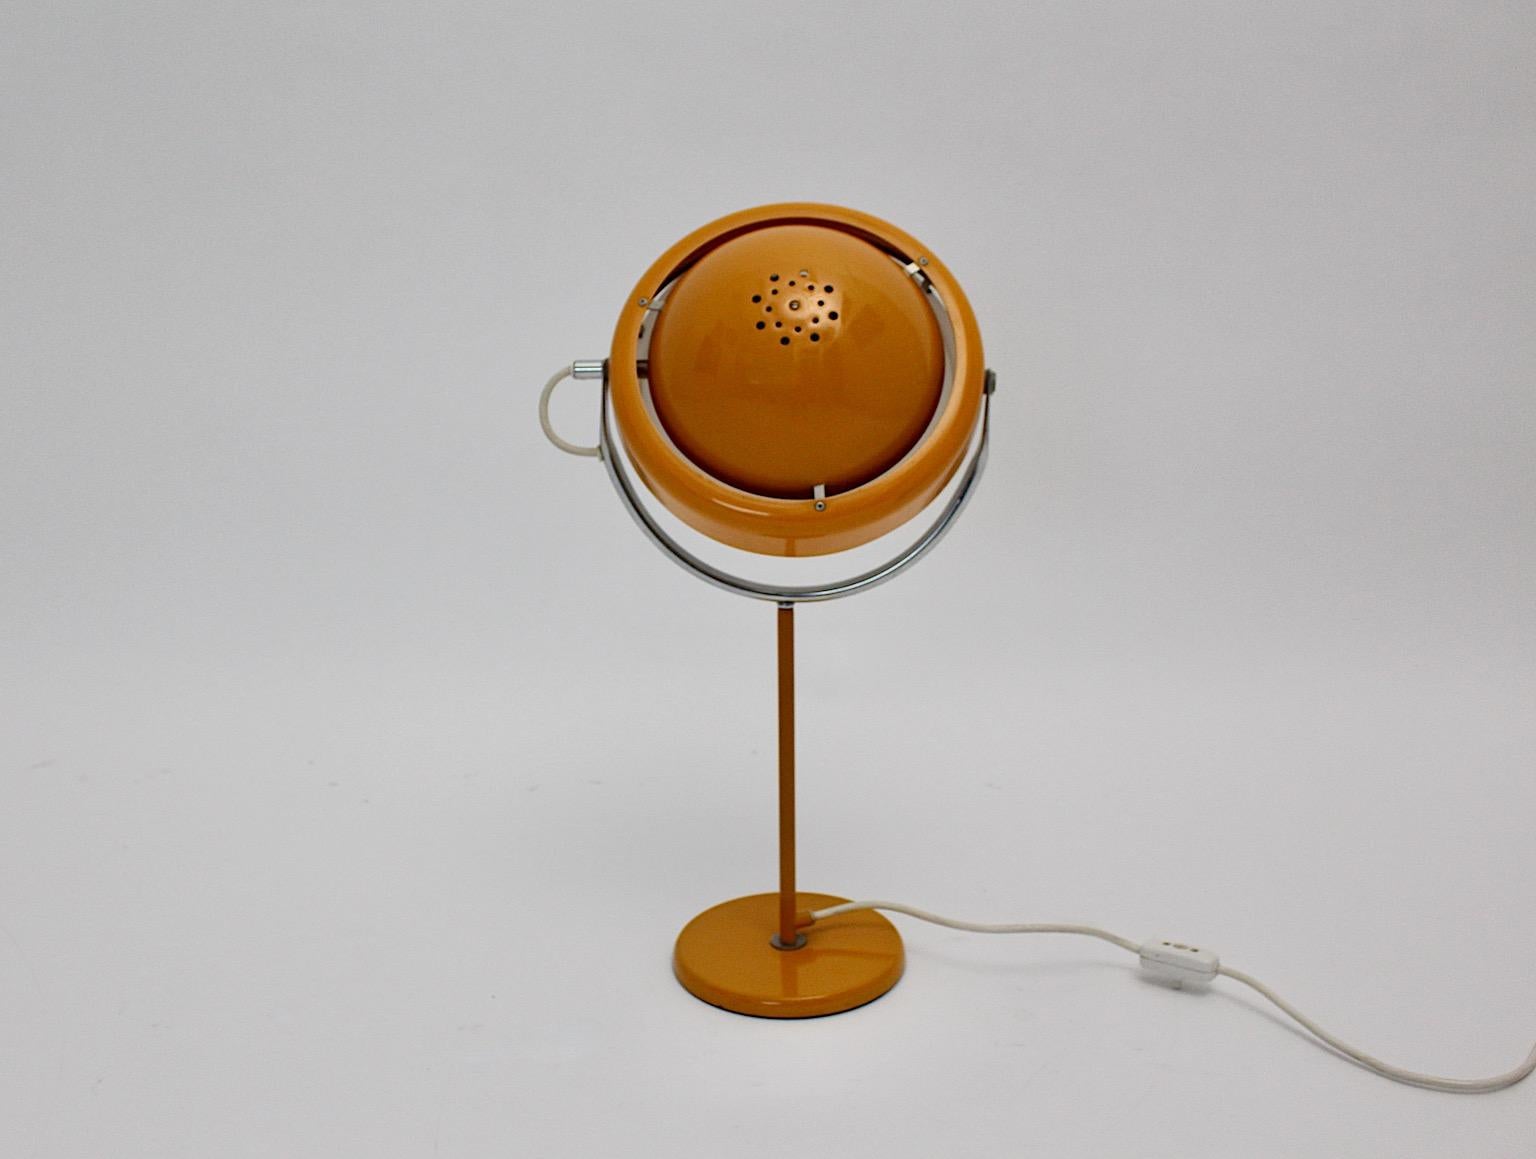 Space Age Vintage Yellow or Orange Table Lamp Uno Dahlen, 1960s, Sweden In Good Condition For Sale In Vienna, AT